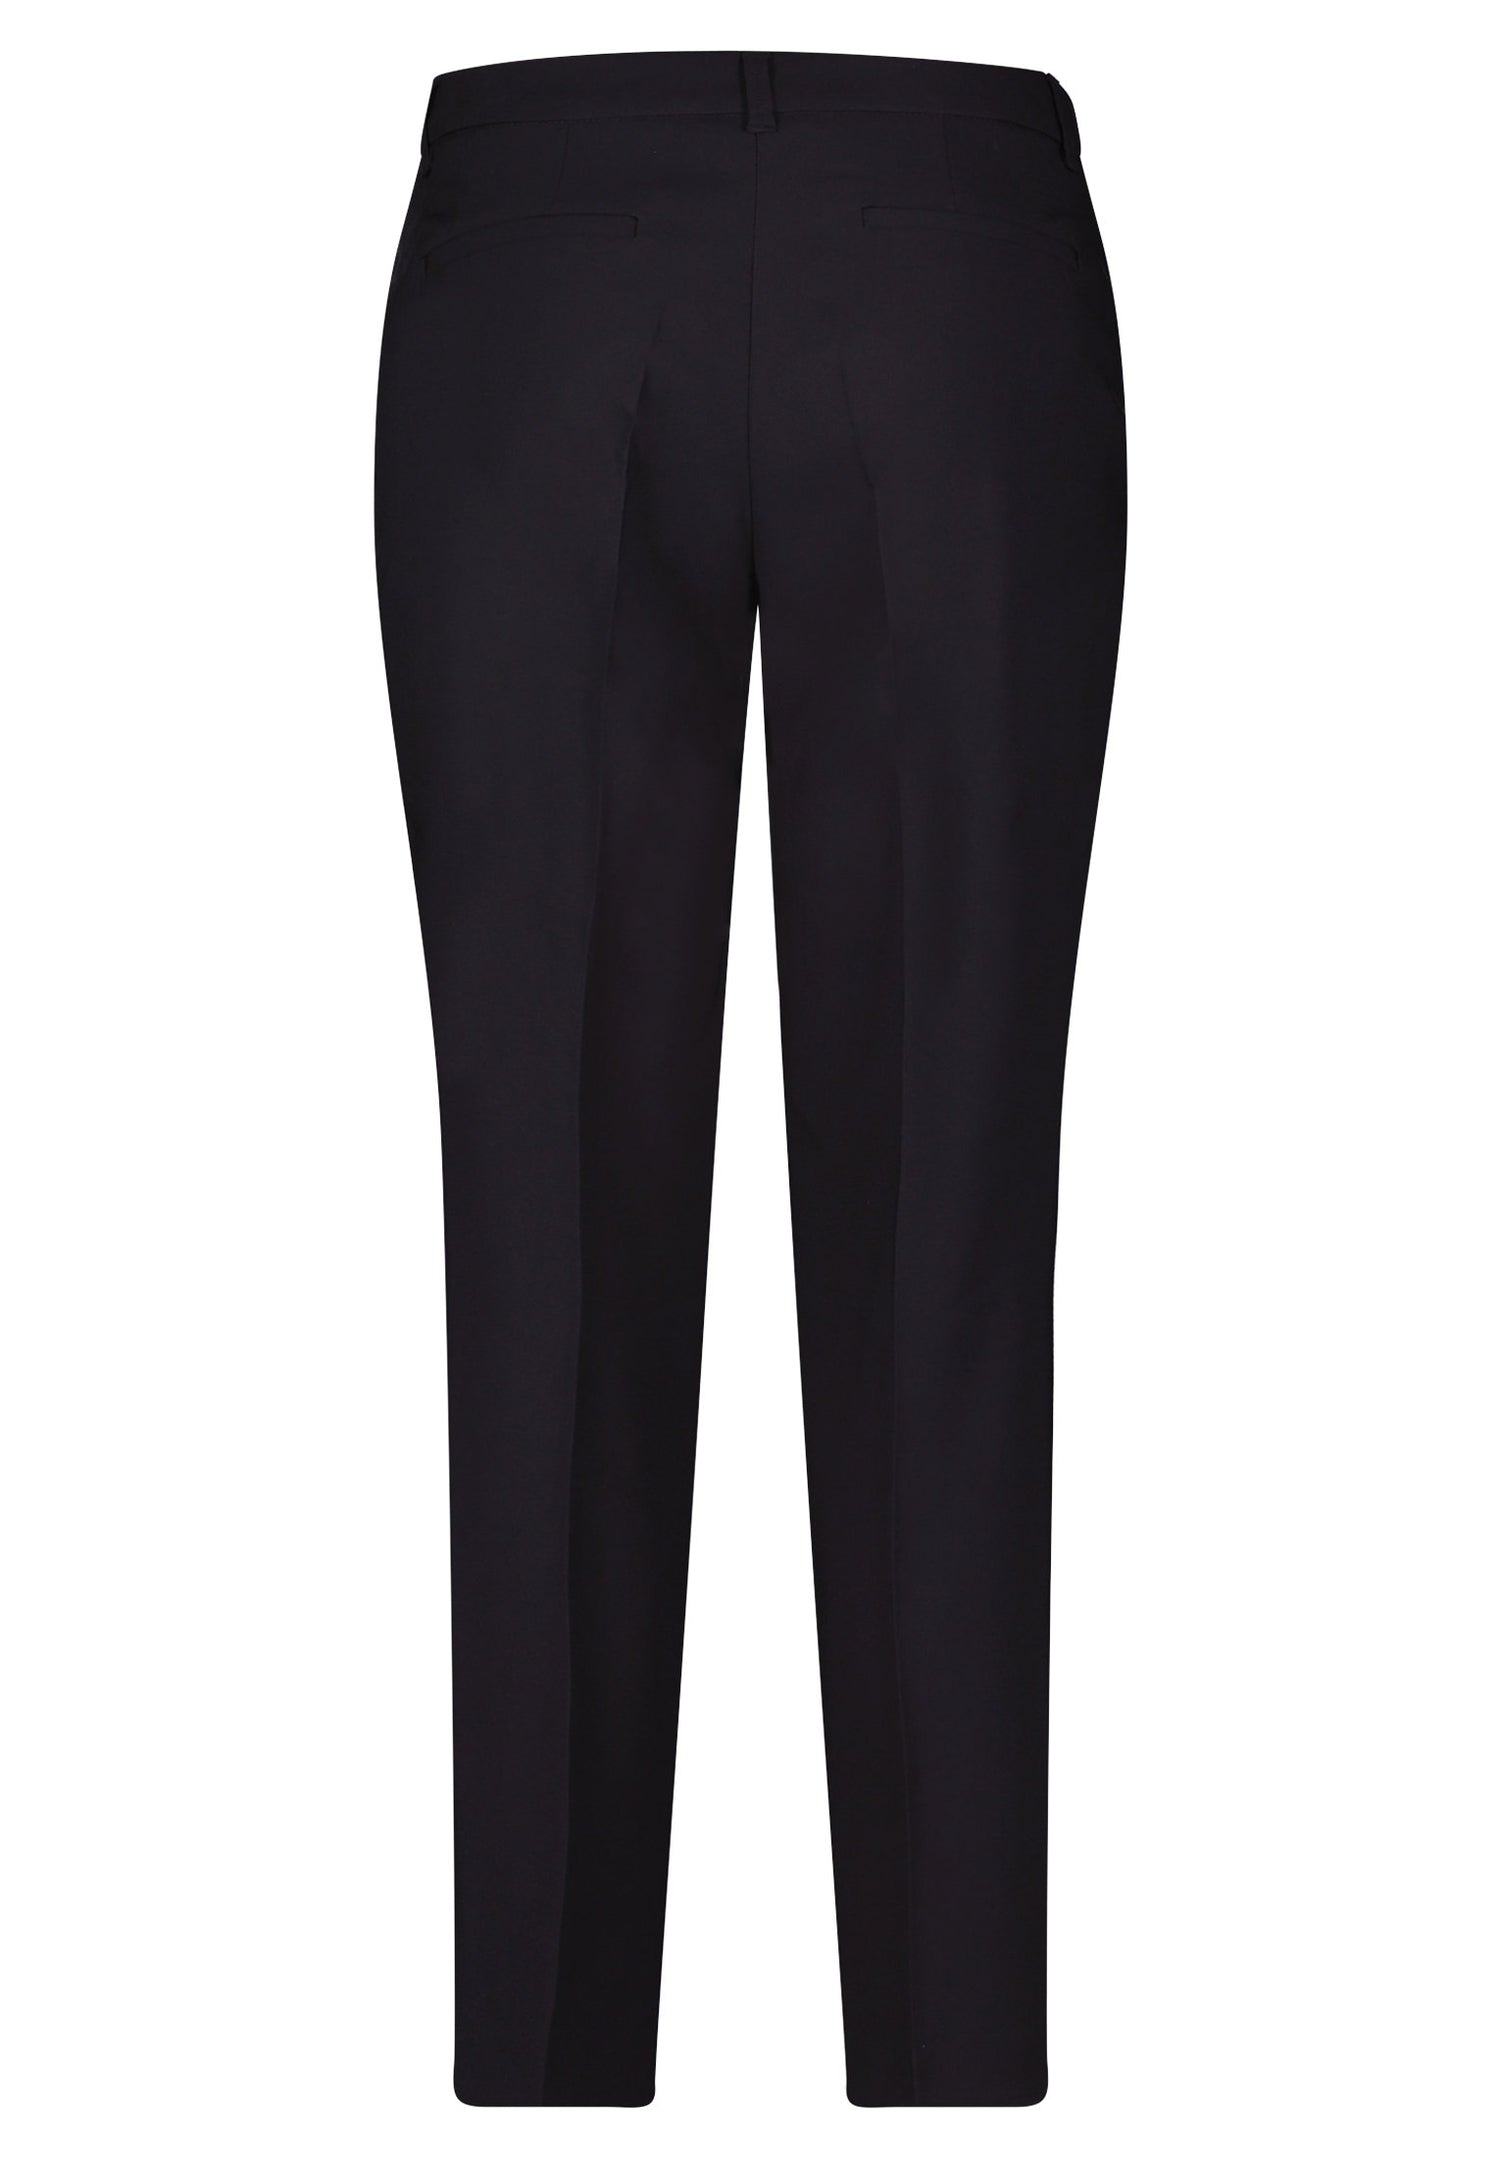 Business Trousers
With Crease_6002-1080_9045_03